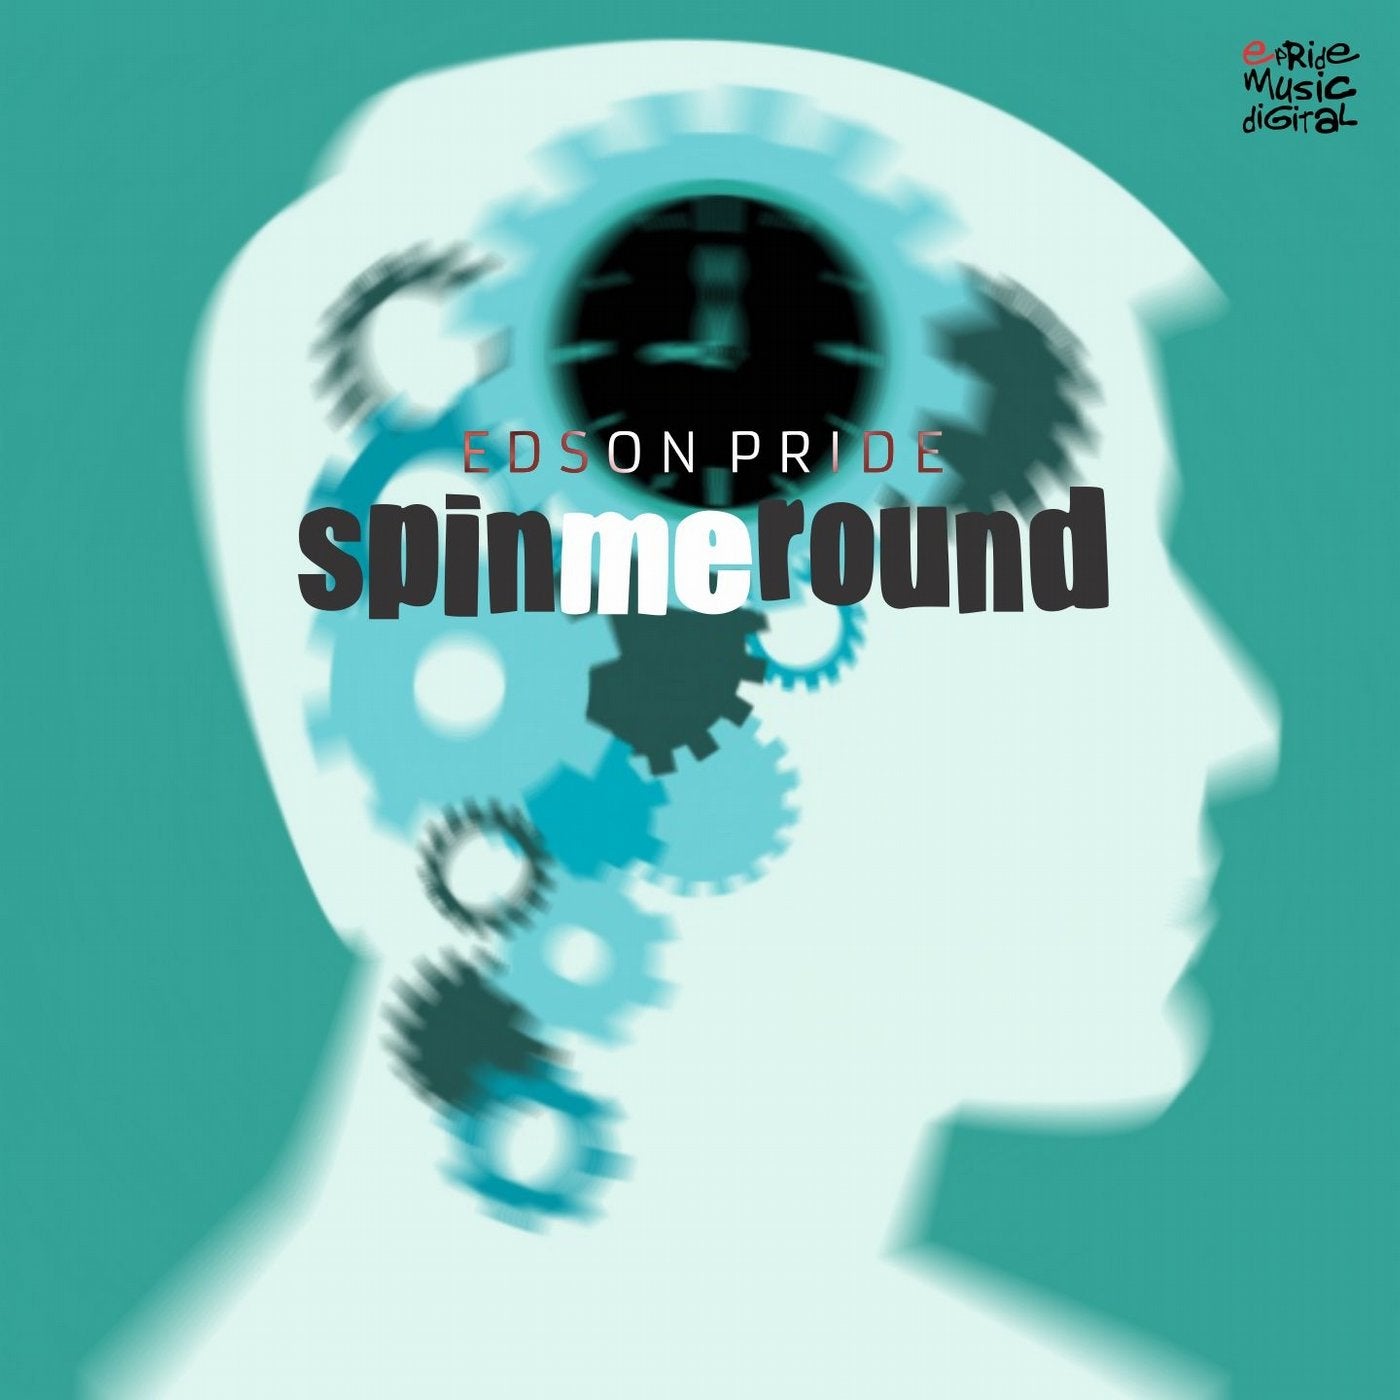 Spin Me Round